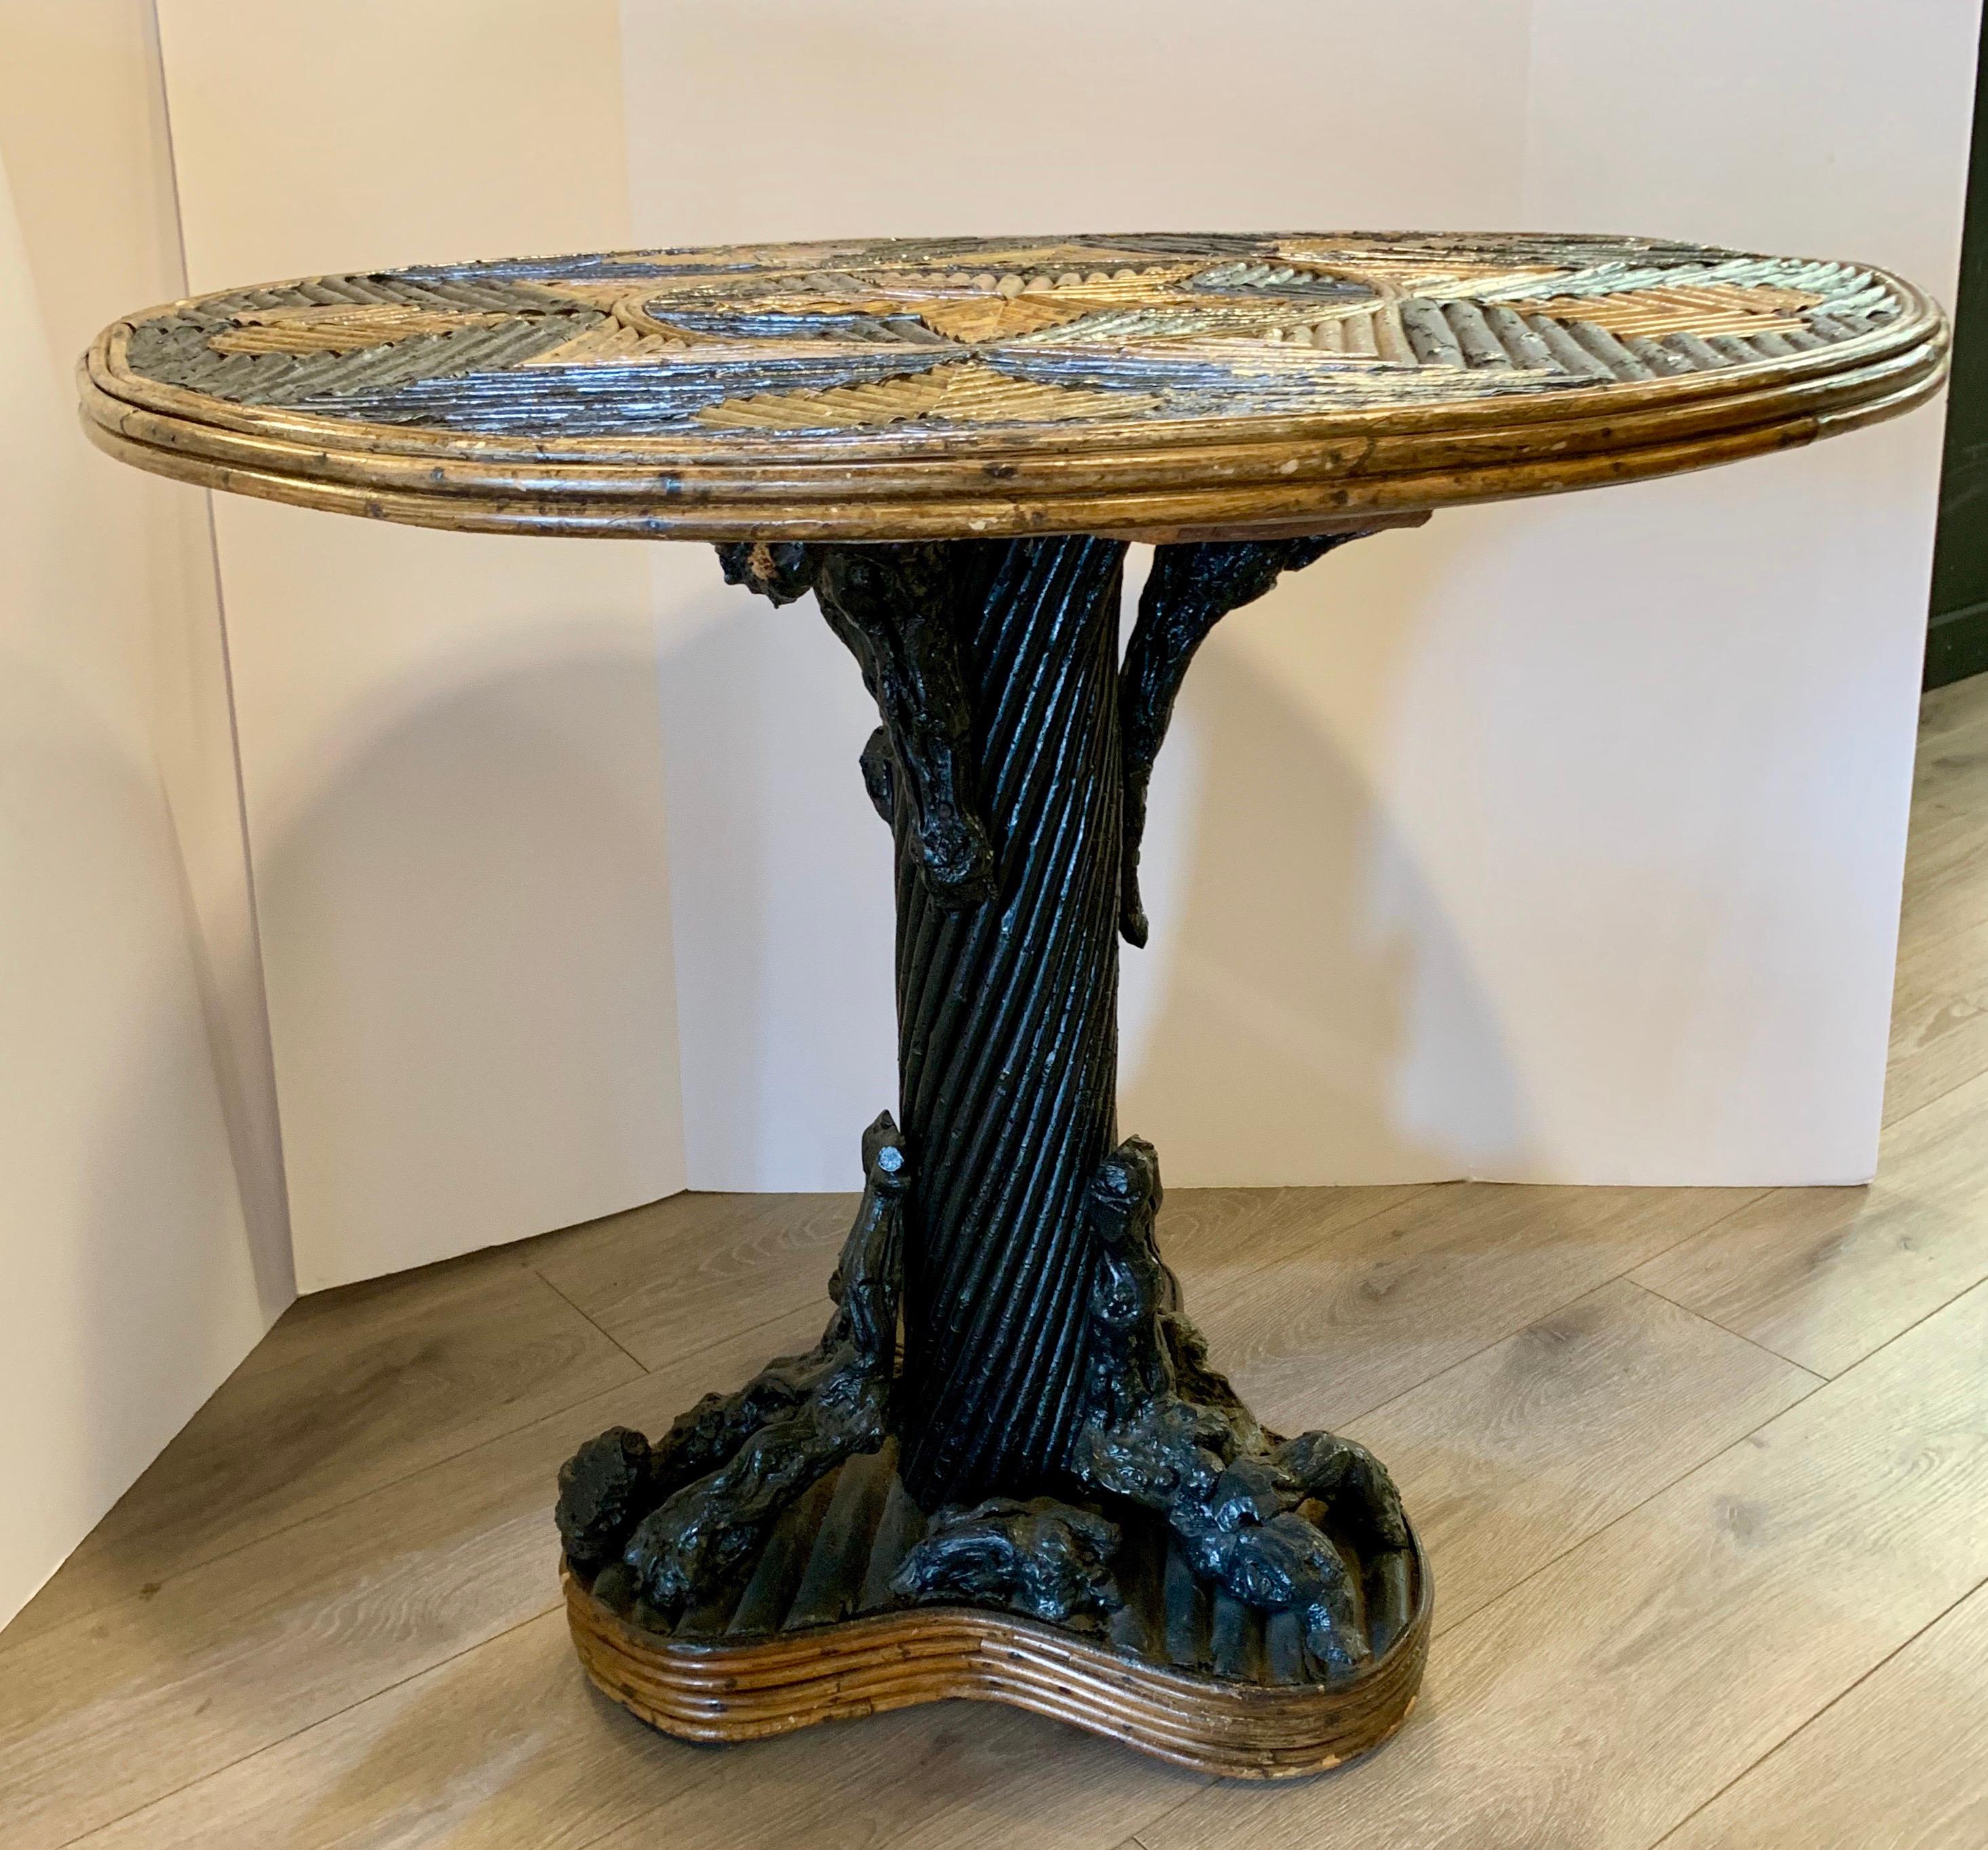 Geometric bent twig detailing on the top and pedestal base give cabin charm to this Adirondack style round table. Features a center star inlay surrounded by hearts inlay. Base has tree root supports.